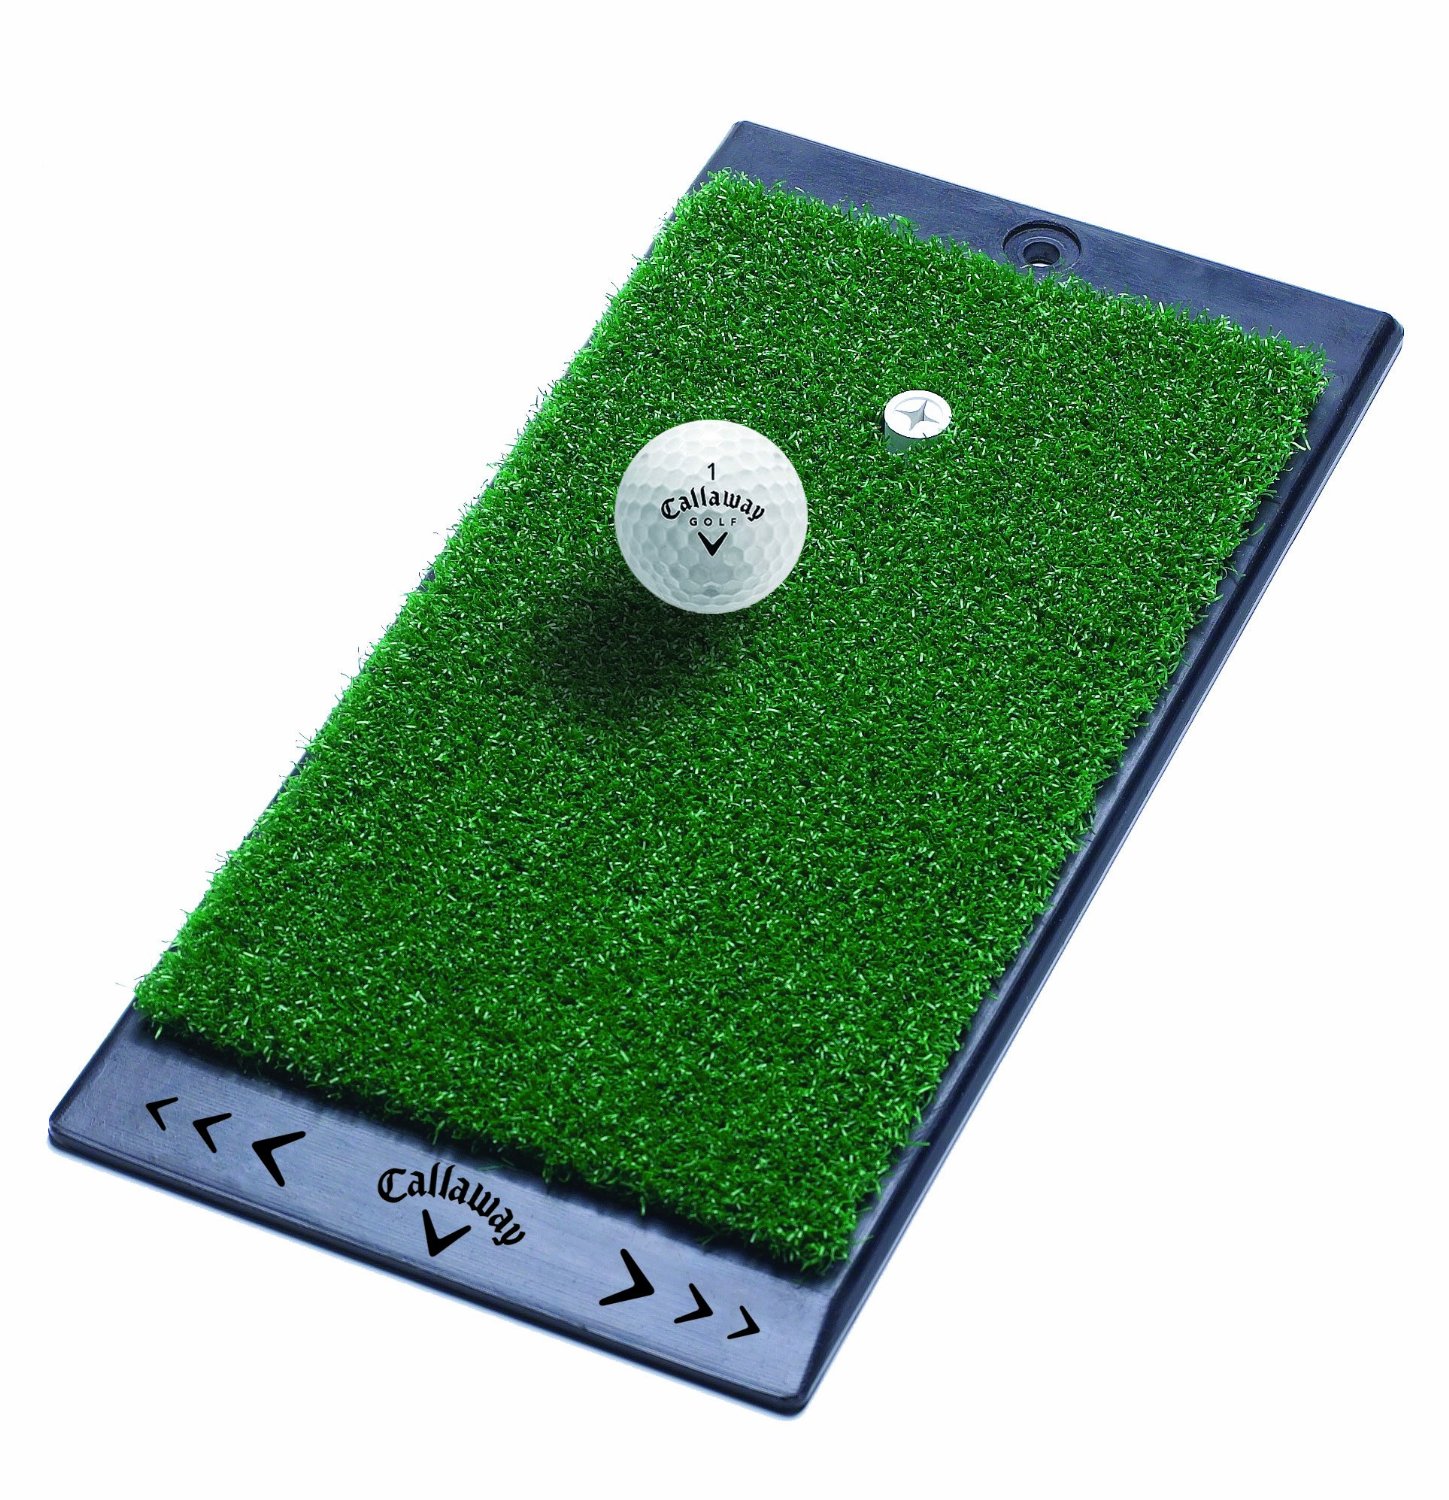 The Gimmee Putting Trainer Golf Putting Training Aids